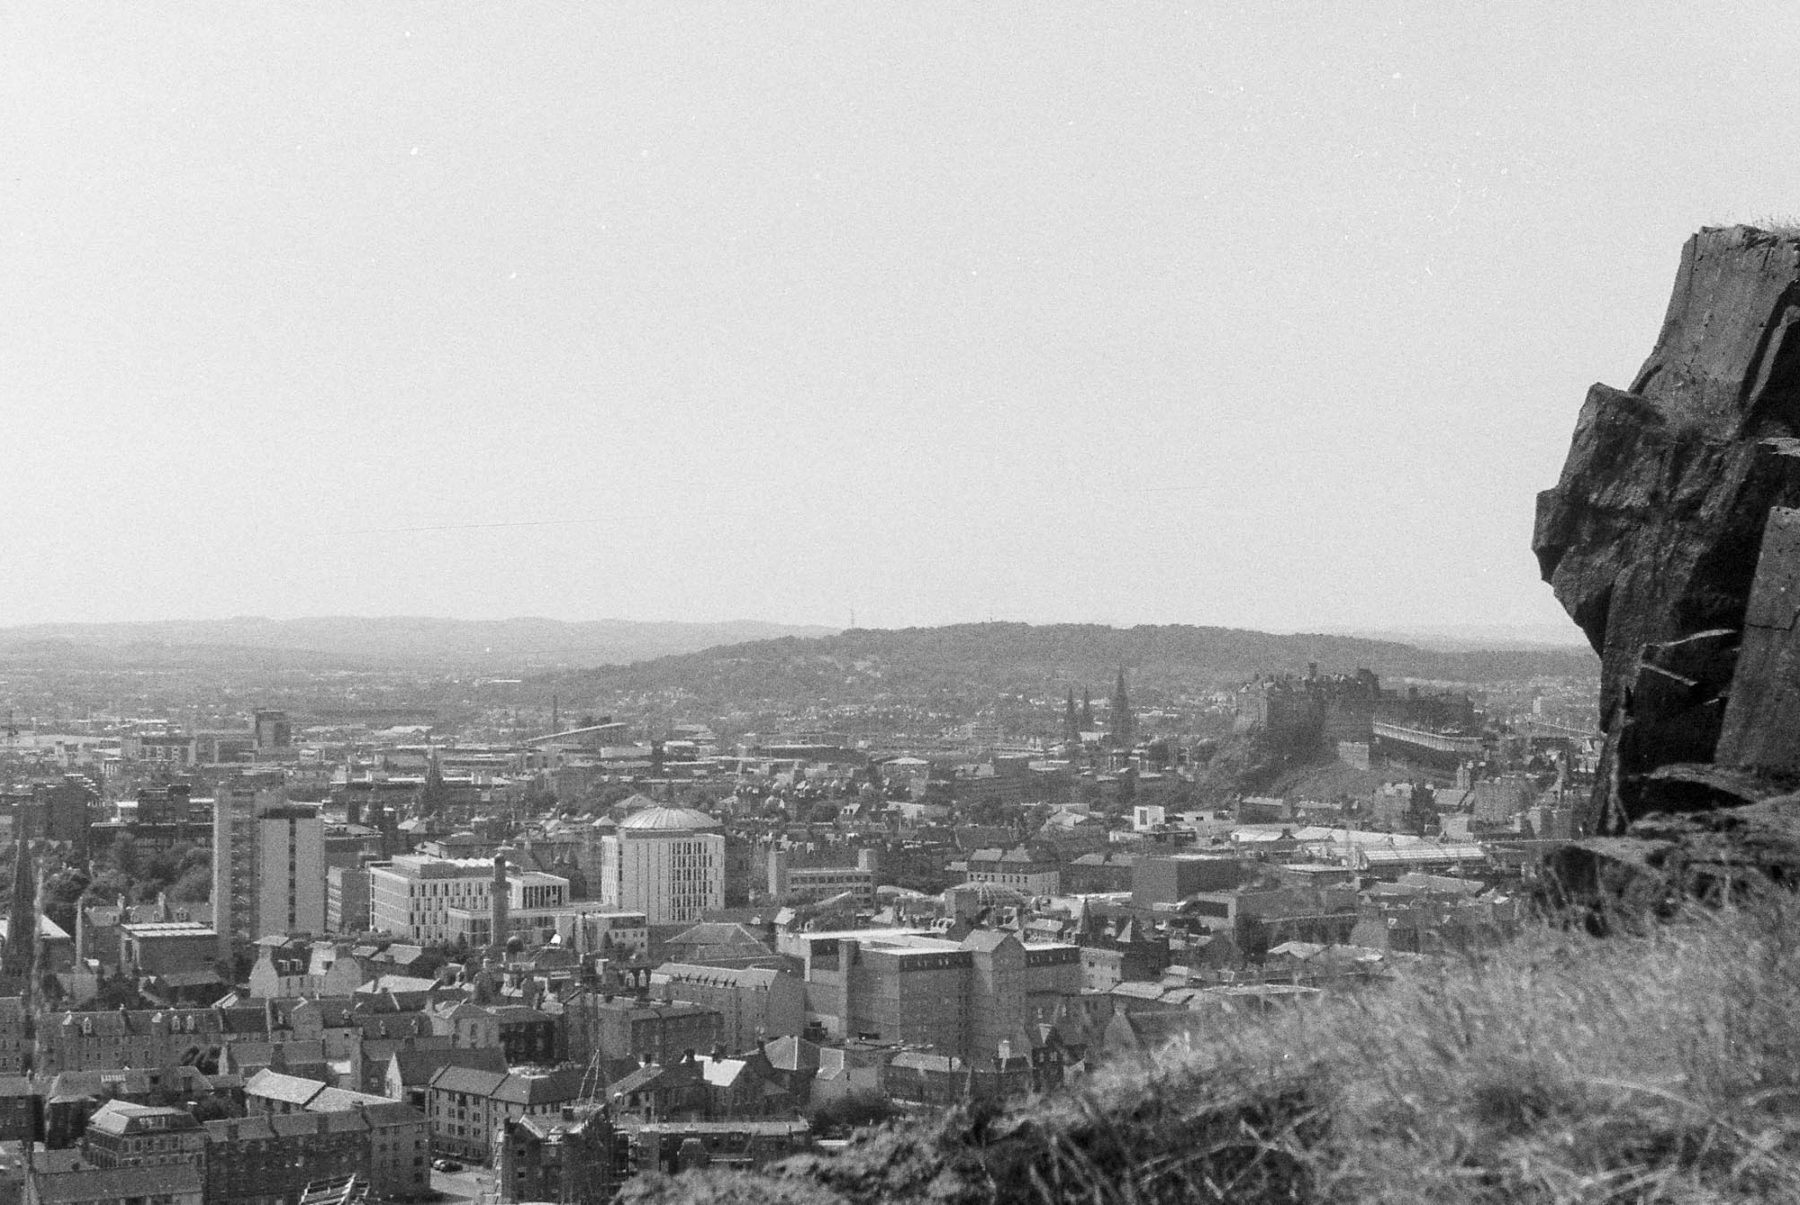 Edinburgh from Salisbury Craggs. View towards the castle across the University and Old Town.